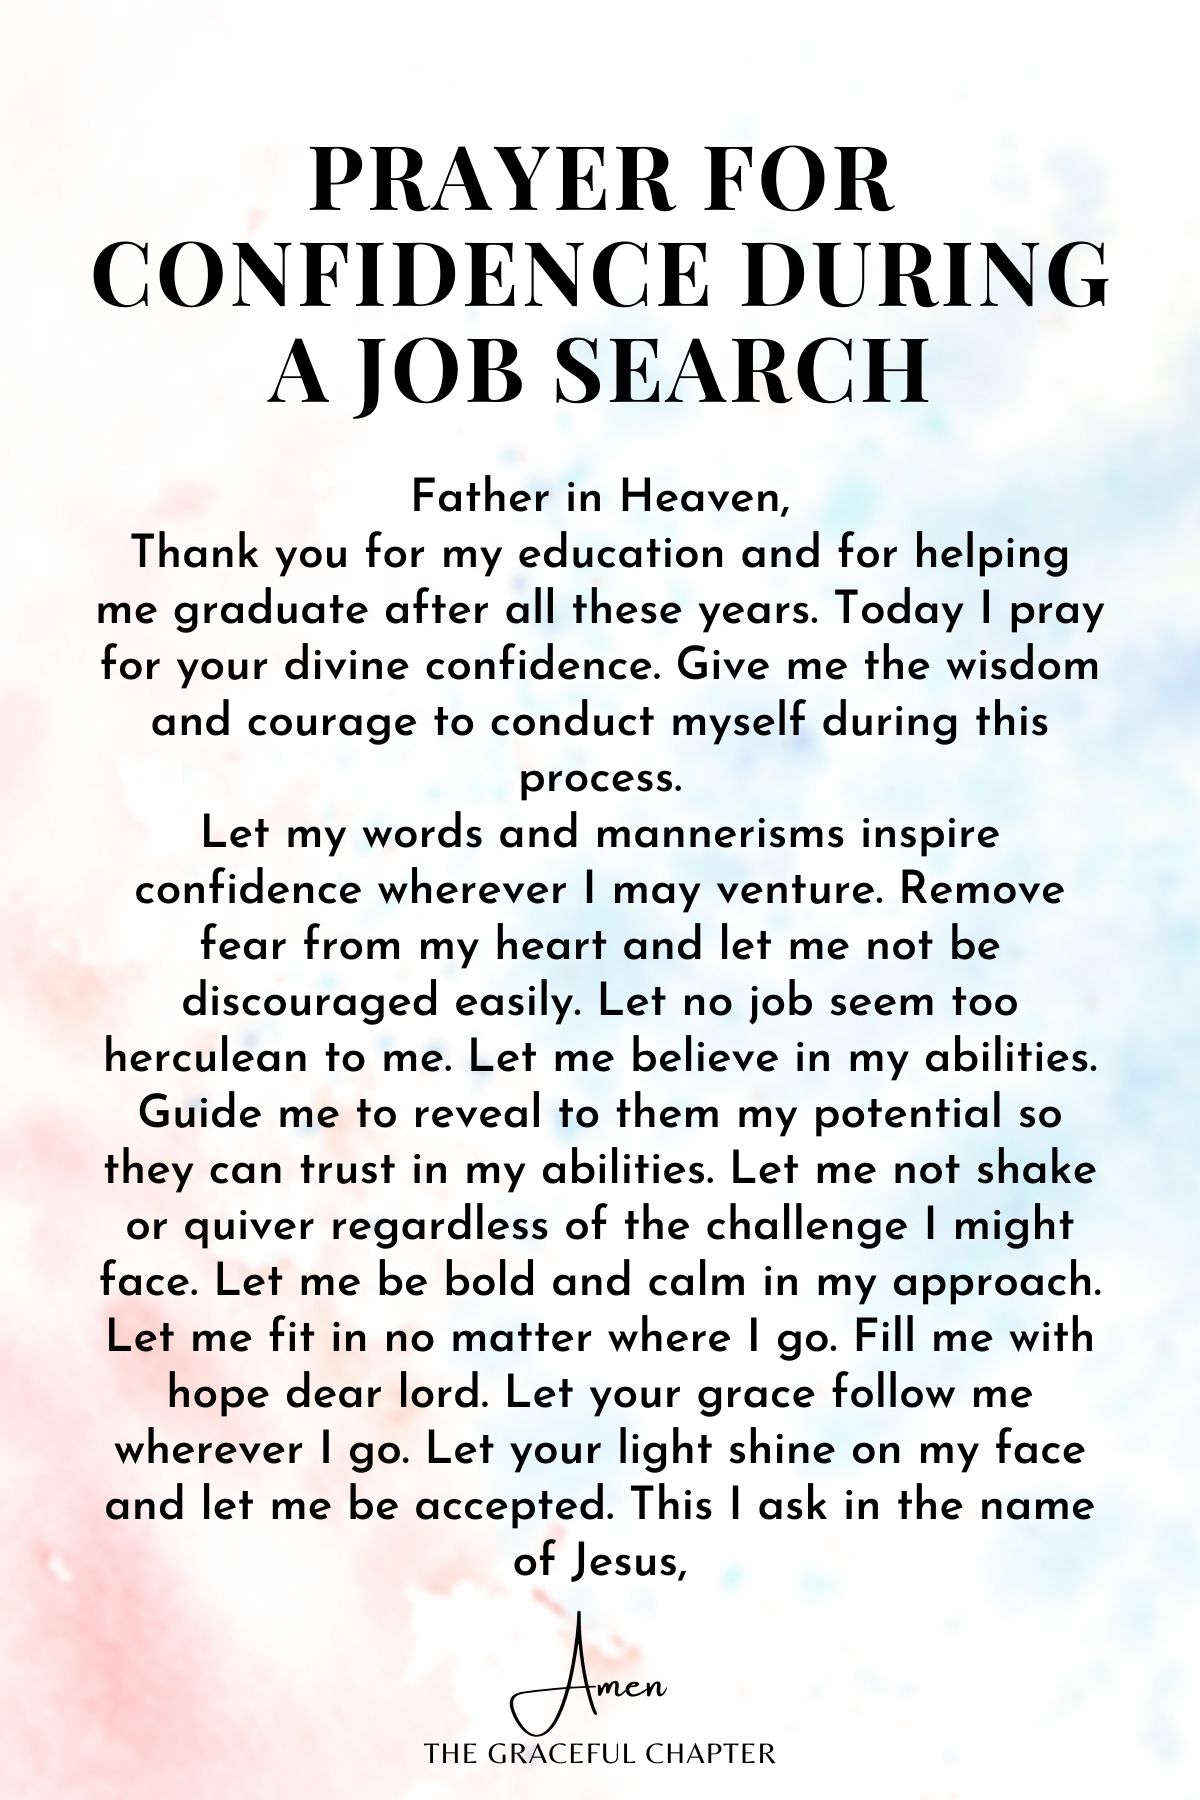 Prayer for Confidence During a Job Search - prayers for employment